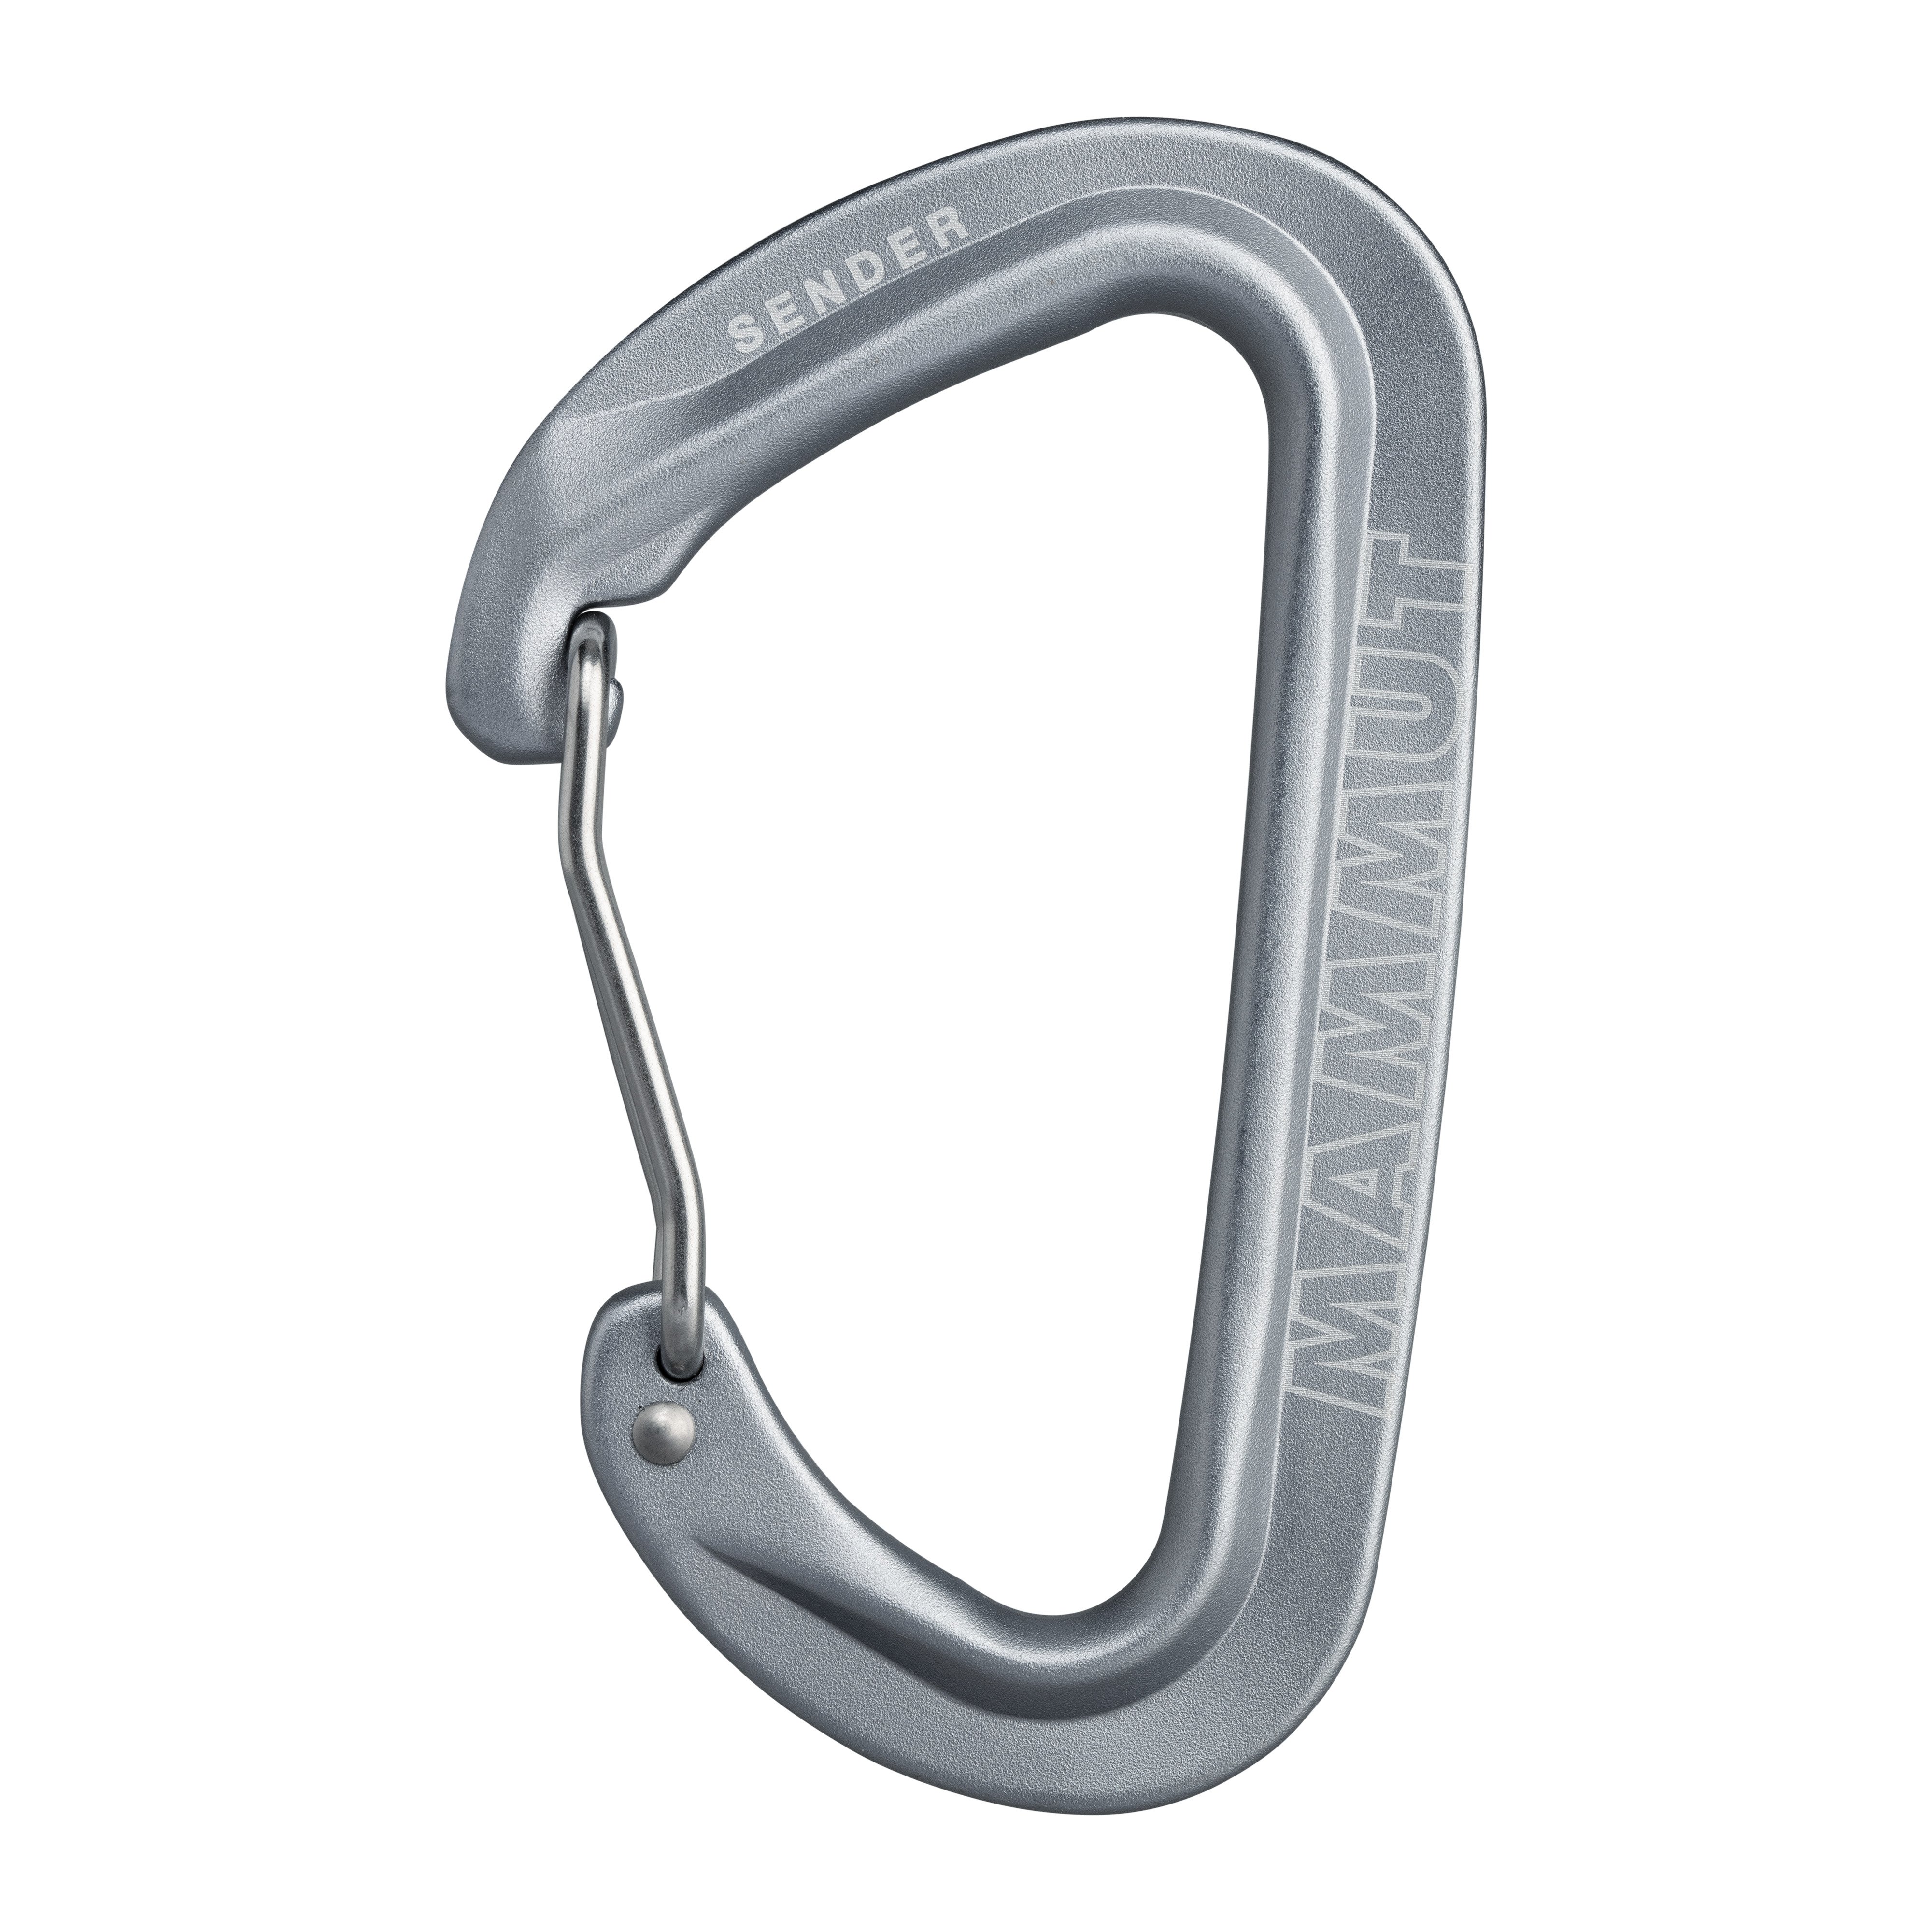 Sender Wire Carabiner - one size product image